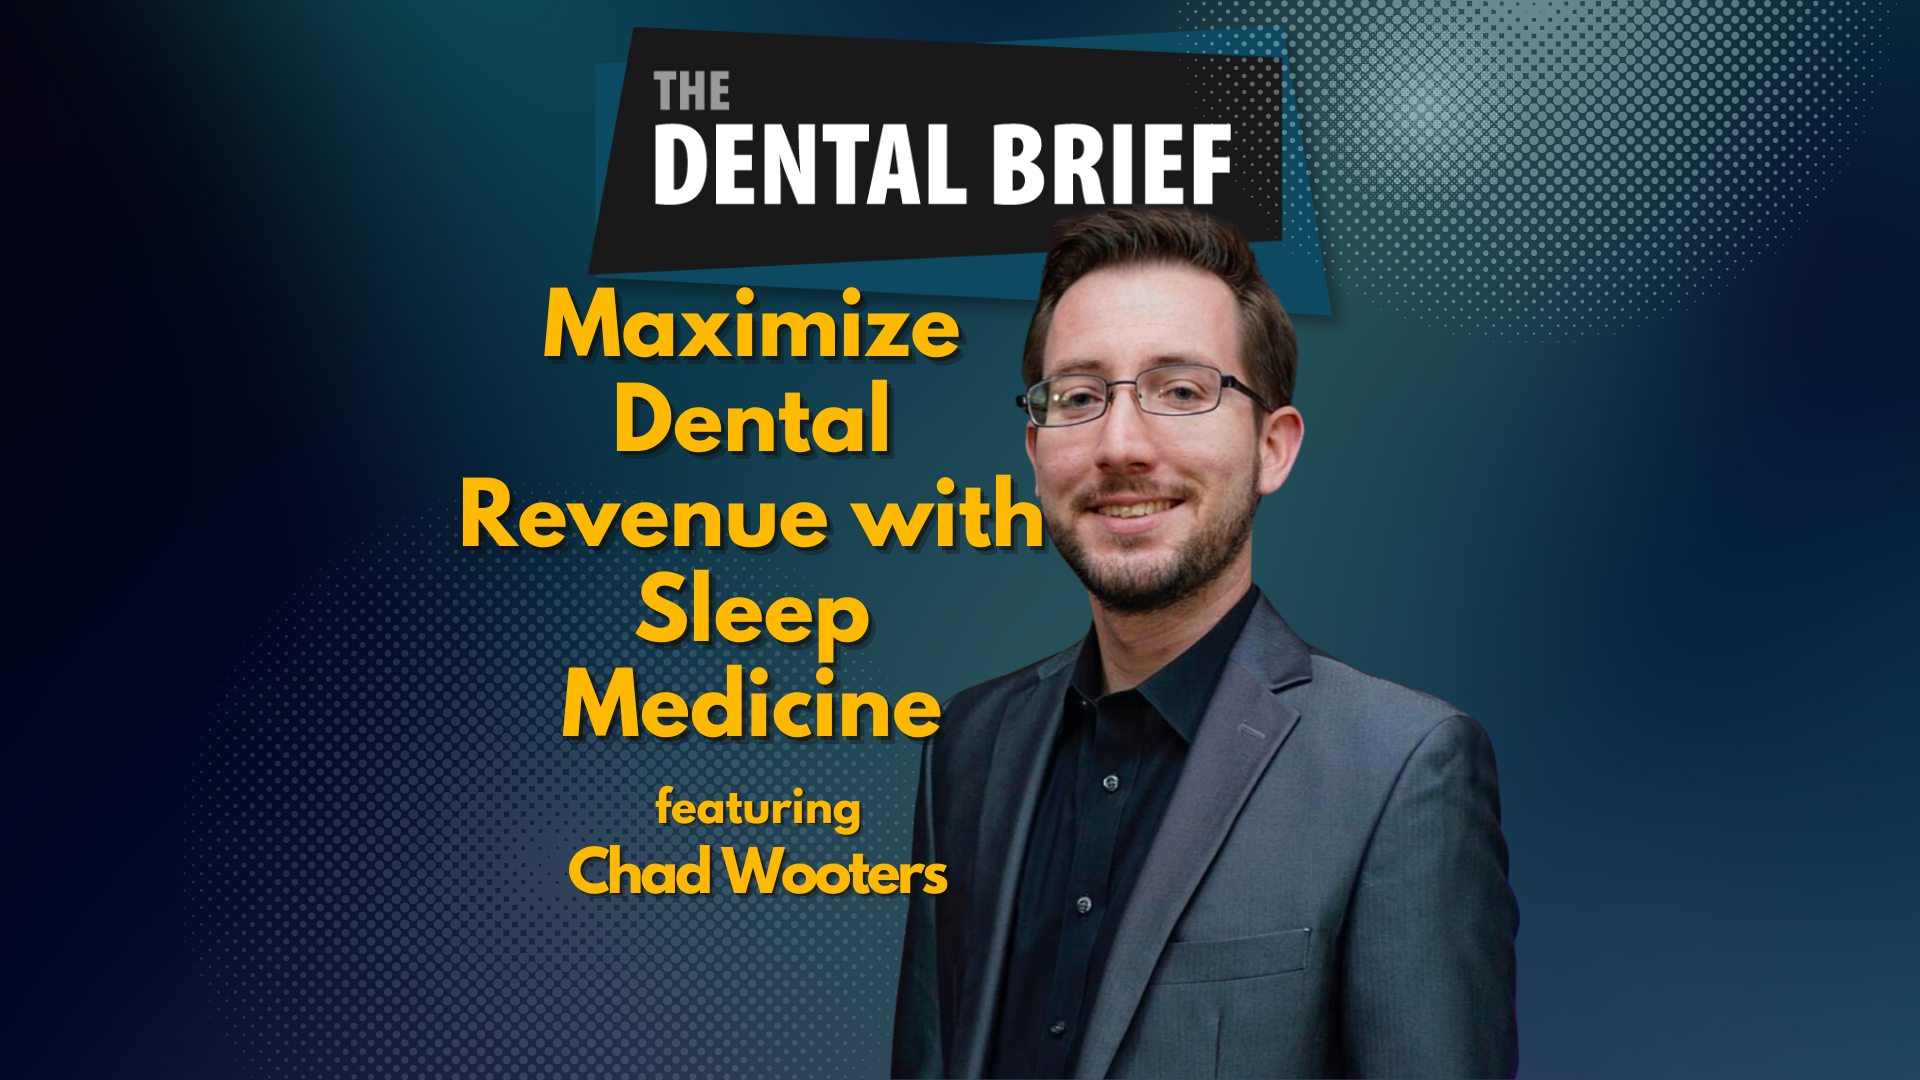 Thumbnail for The dental brief podcast episode featuring Chad Wooters of Awaken2Sleep